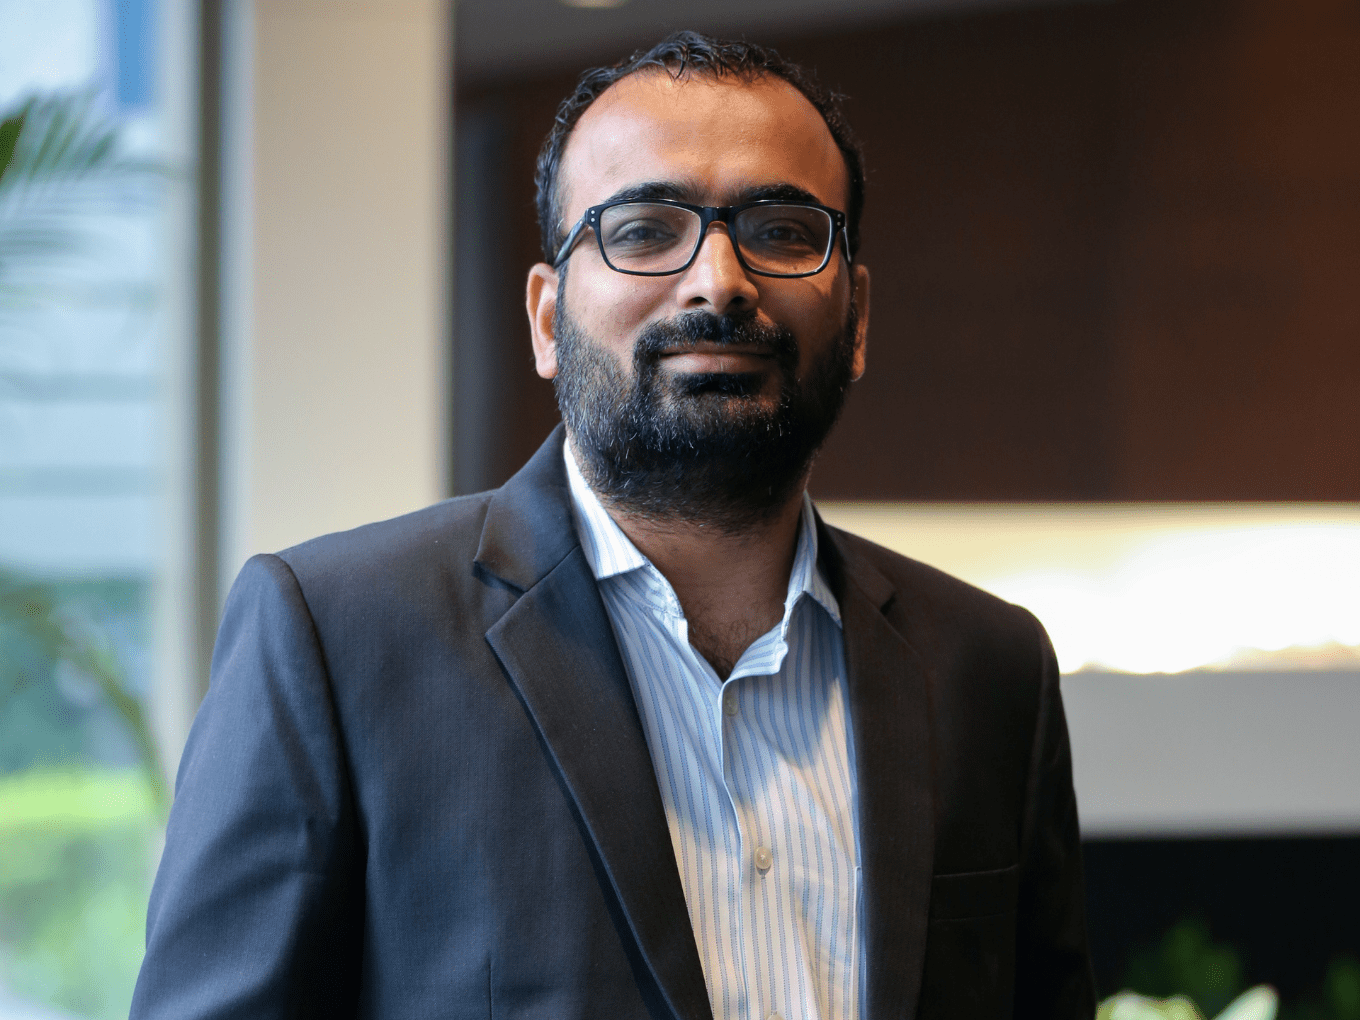 Housing.com’s Vikas Wadhawan On The Evolving Role Of A CFO As A Multiskilled Leader With A Bigger Vision